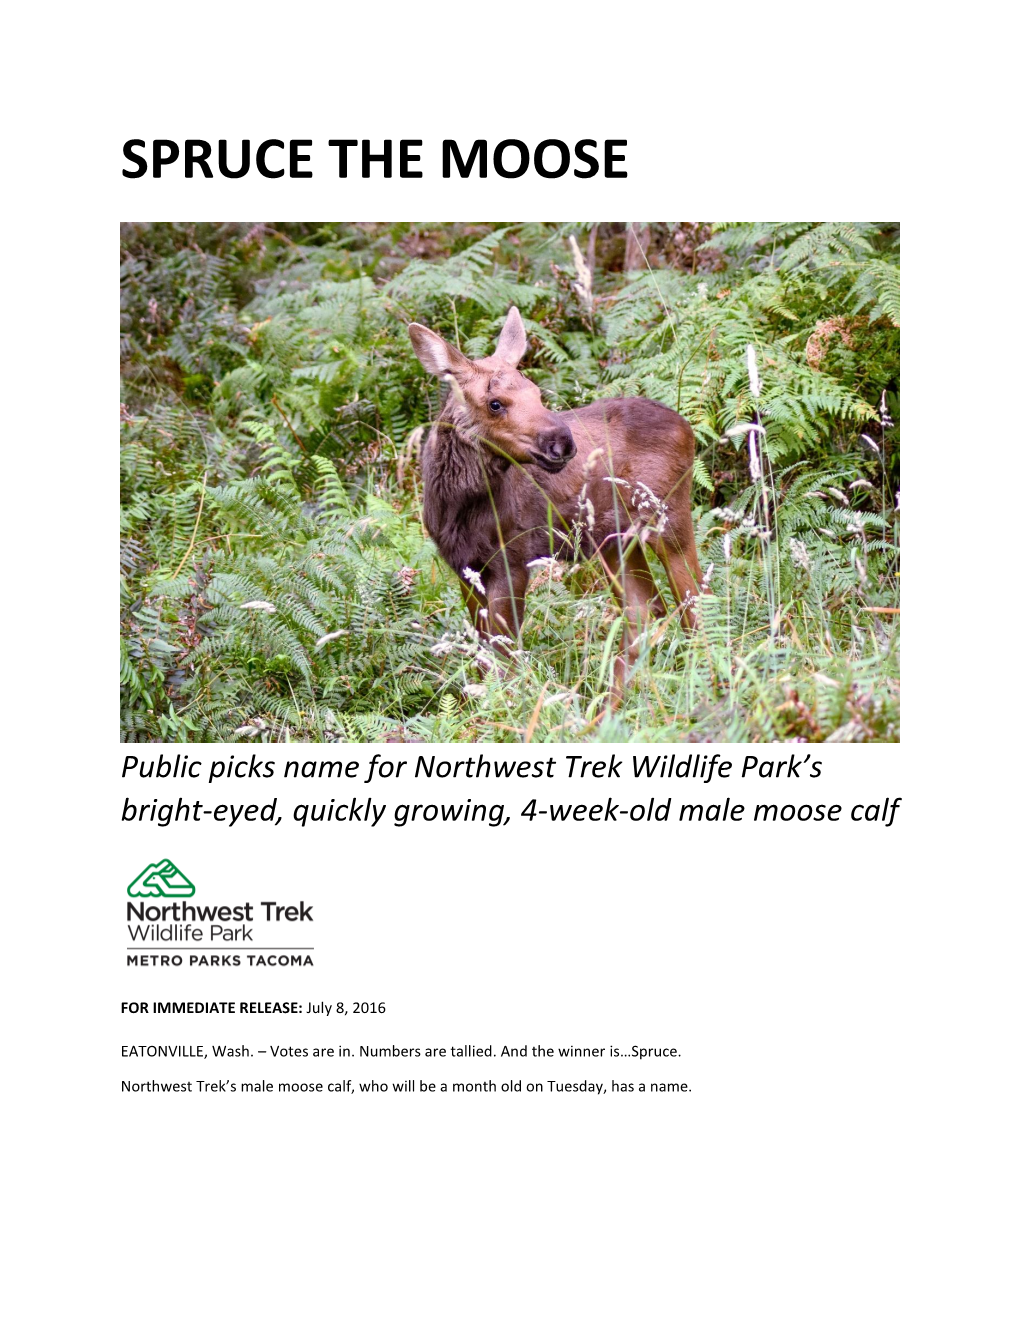 Spruce the Moose